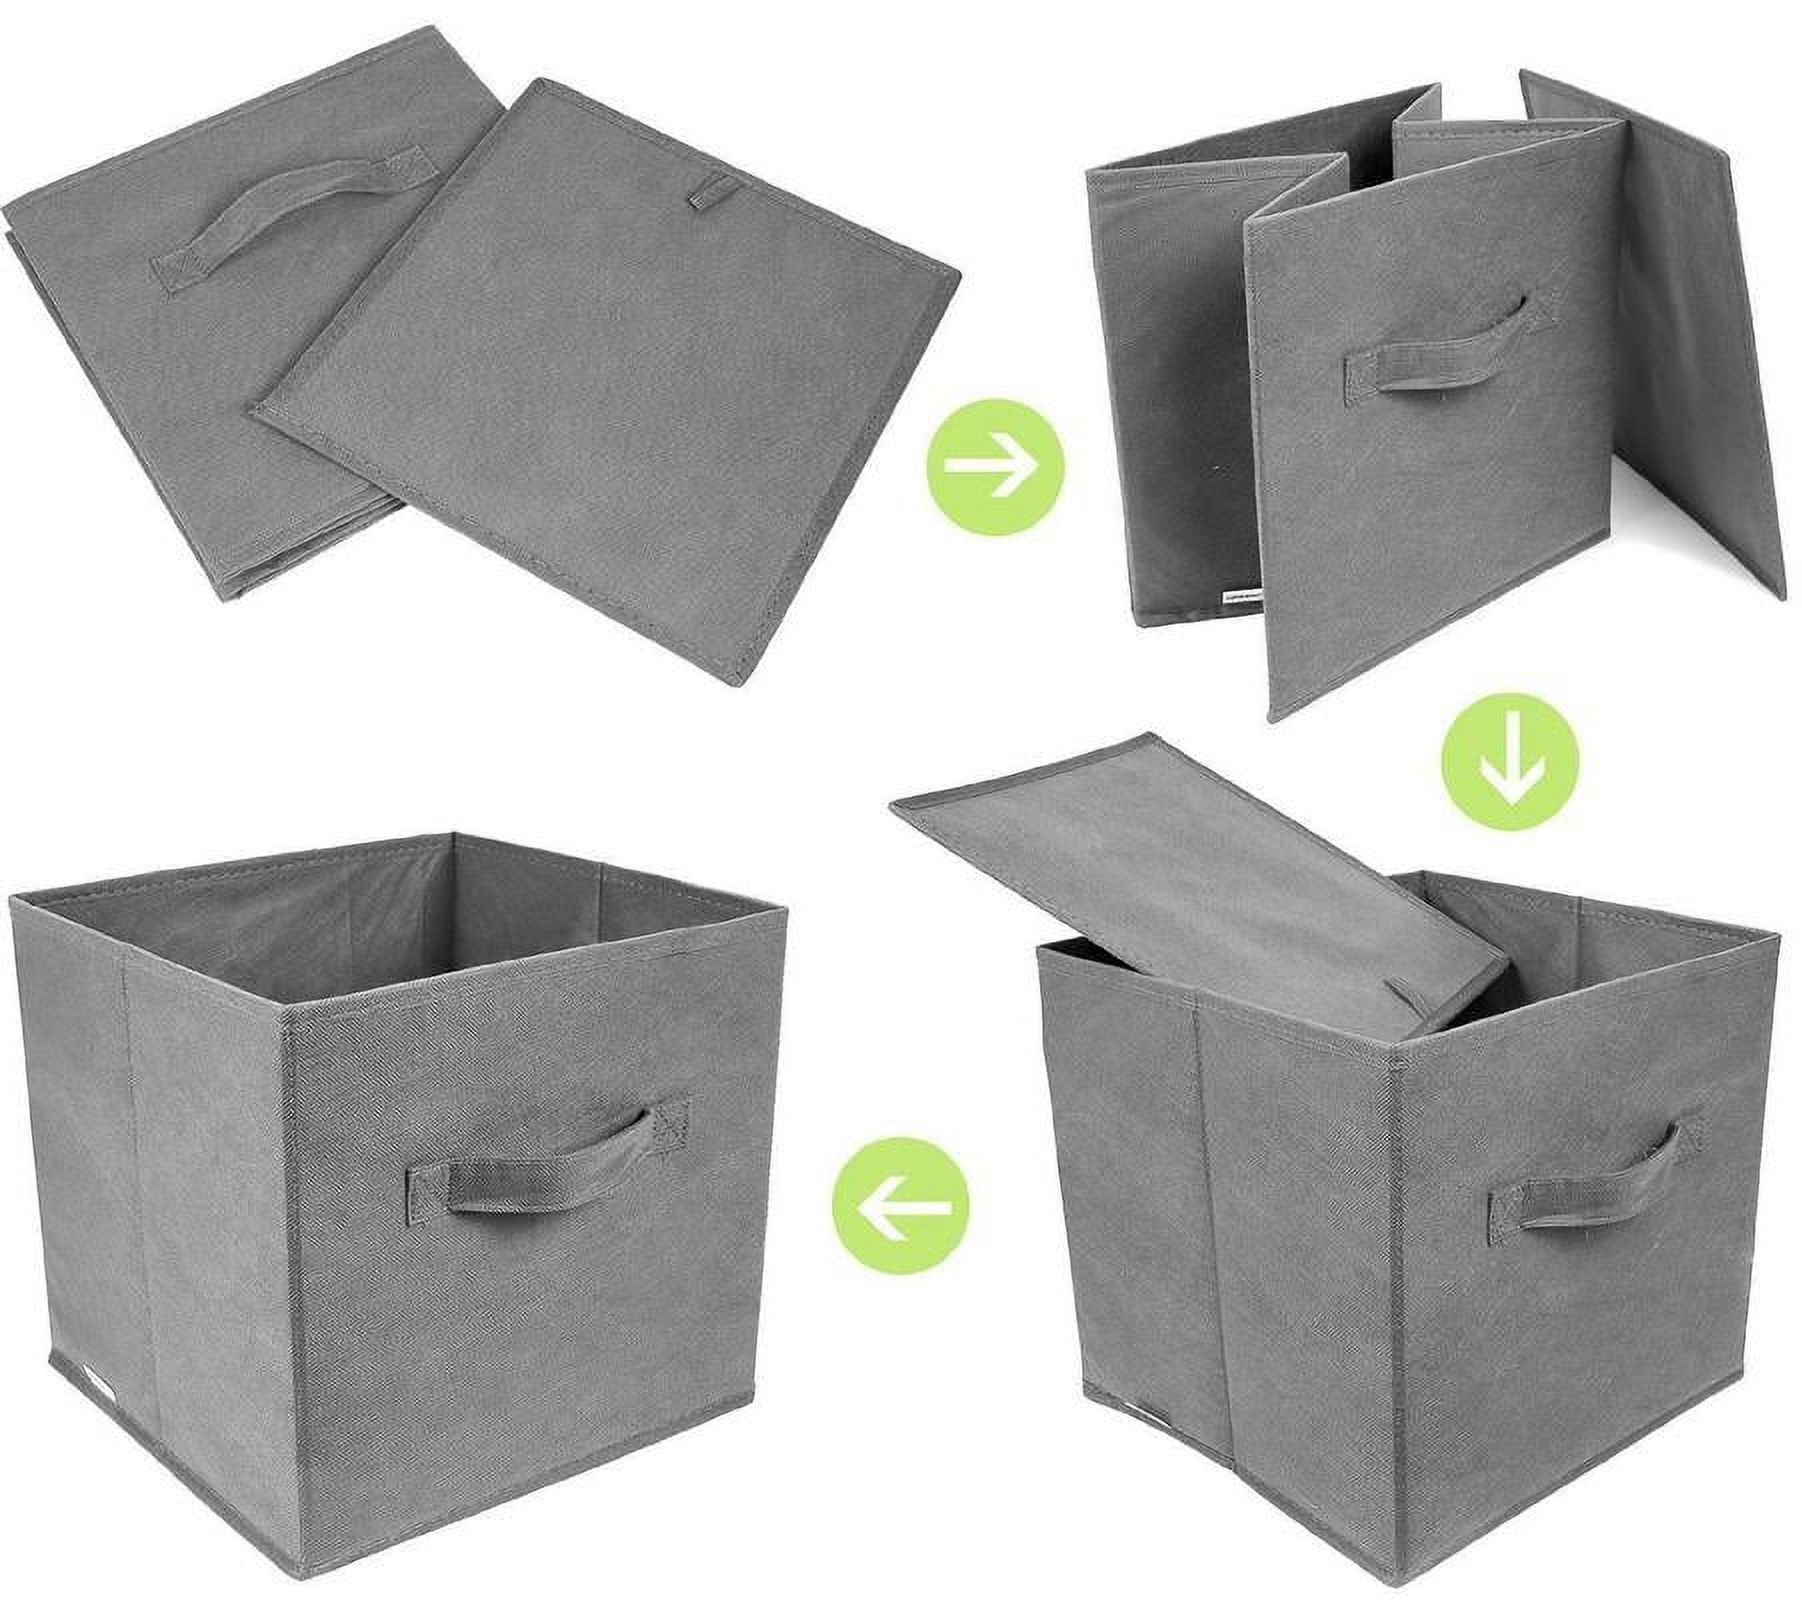 Greenco Foldable Fabric Storage Cubes Non-Woven Fabric | Gray Cube Storage Bins | Shelf Baskets| Gray Fabric Cubes | 6 Pack - image 2 of 5